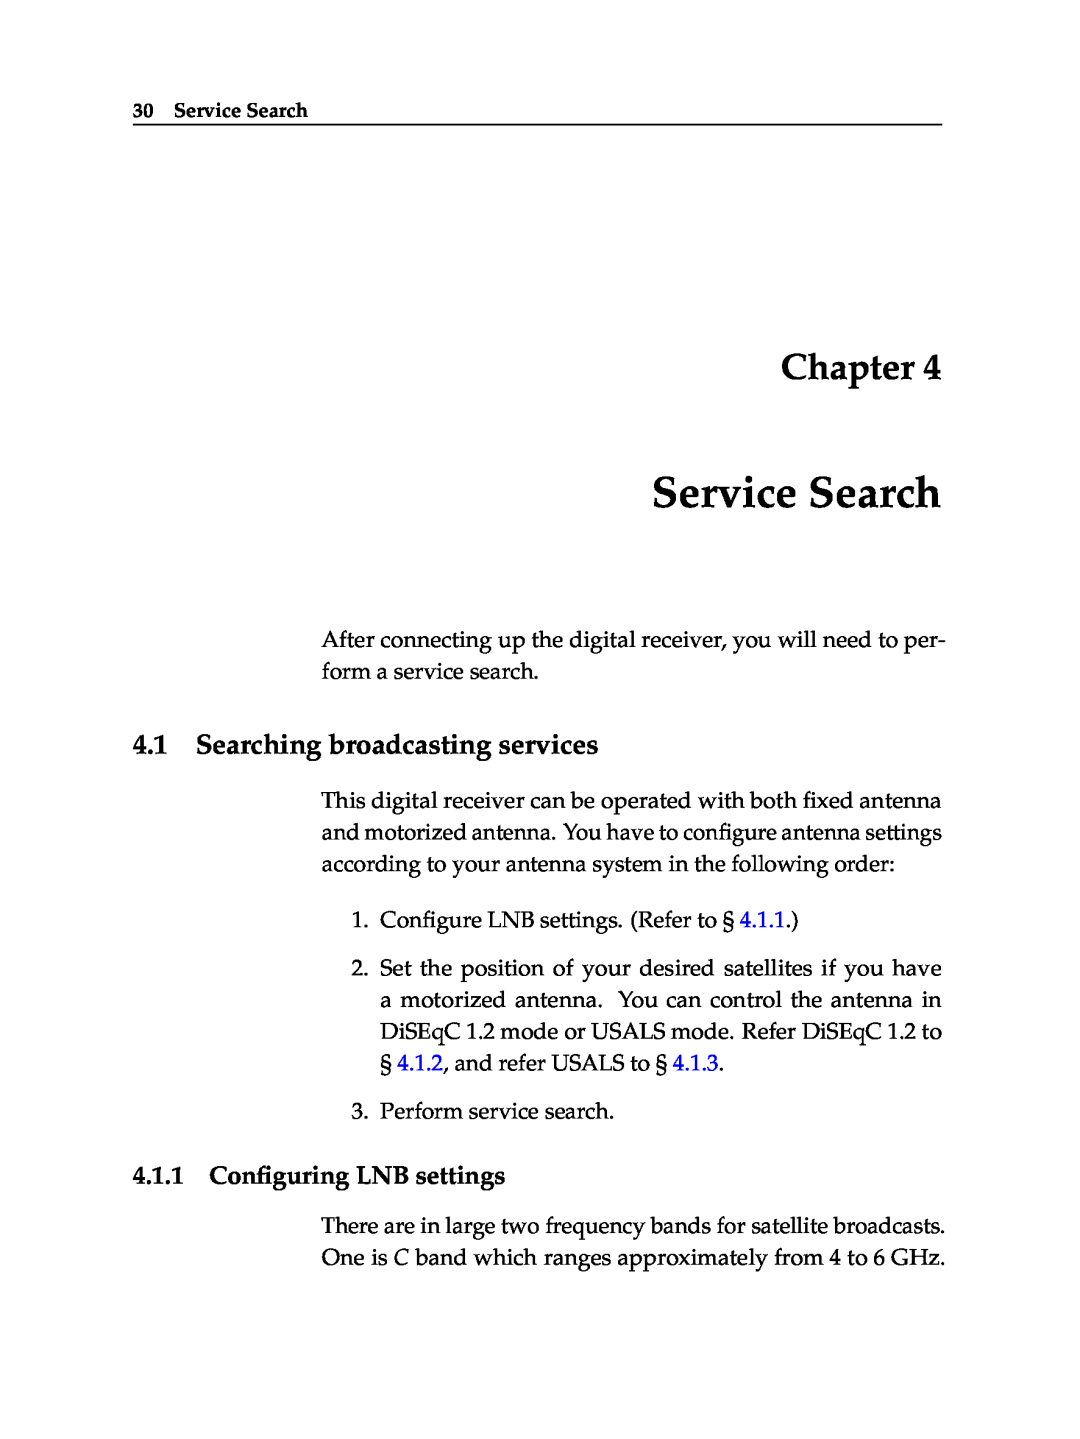 Topfield TF 6000 PVR ES manual Service Search, Searching broadcasting services, 4.1.1 Conﬁguring LNB settings, Chapter 